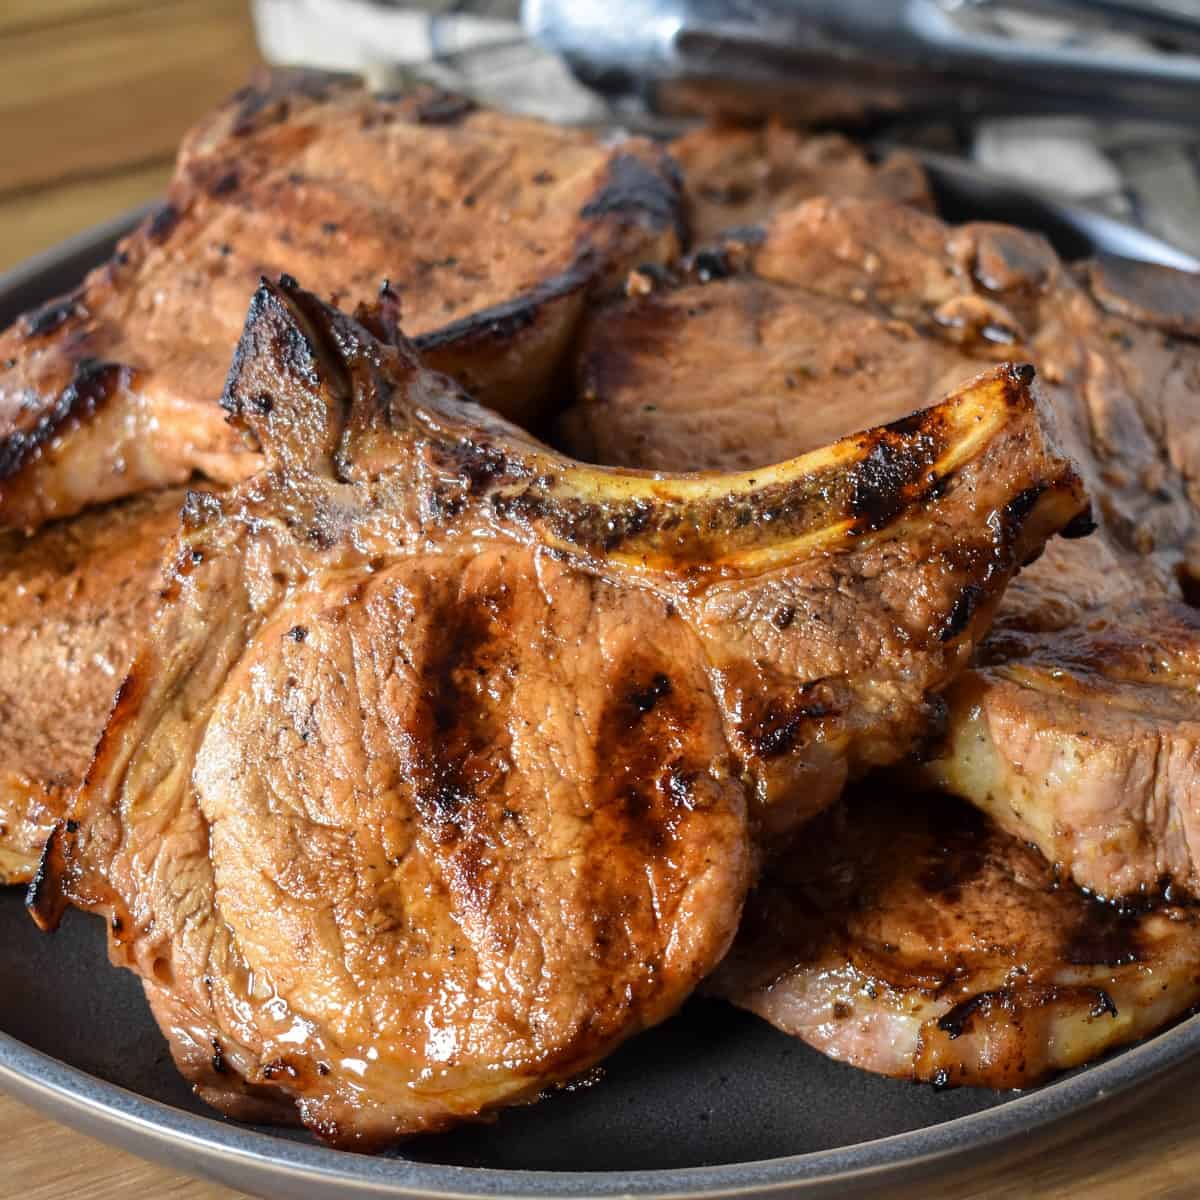 An image of the grilled pork chops set on a gray platter.